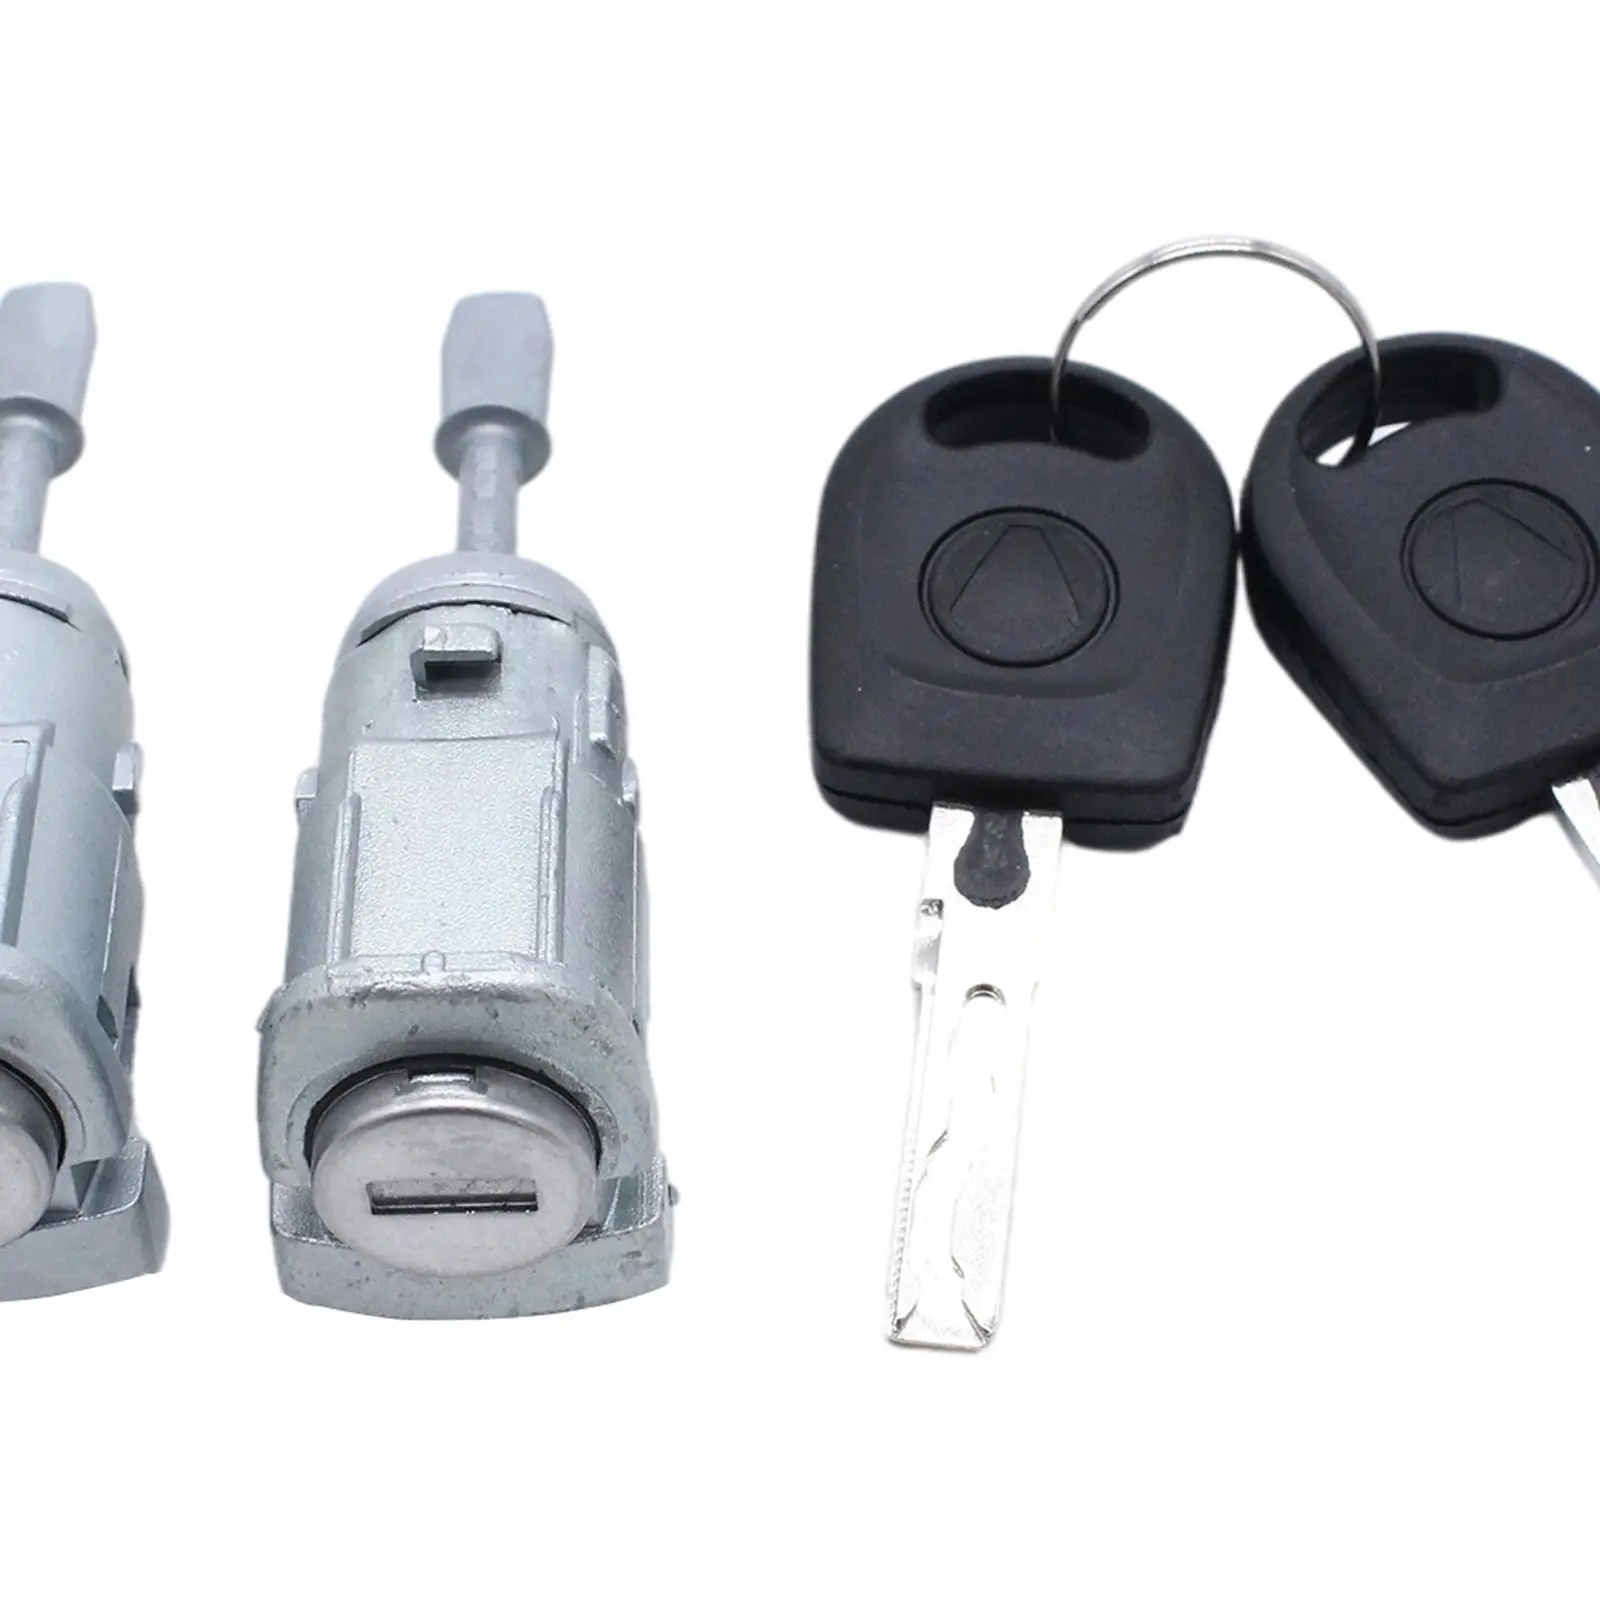 1 Pair Left & Right Door Lock Cylinder with 2 Keys for VW Bora 1J2 98-05 Parts Accessories